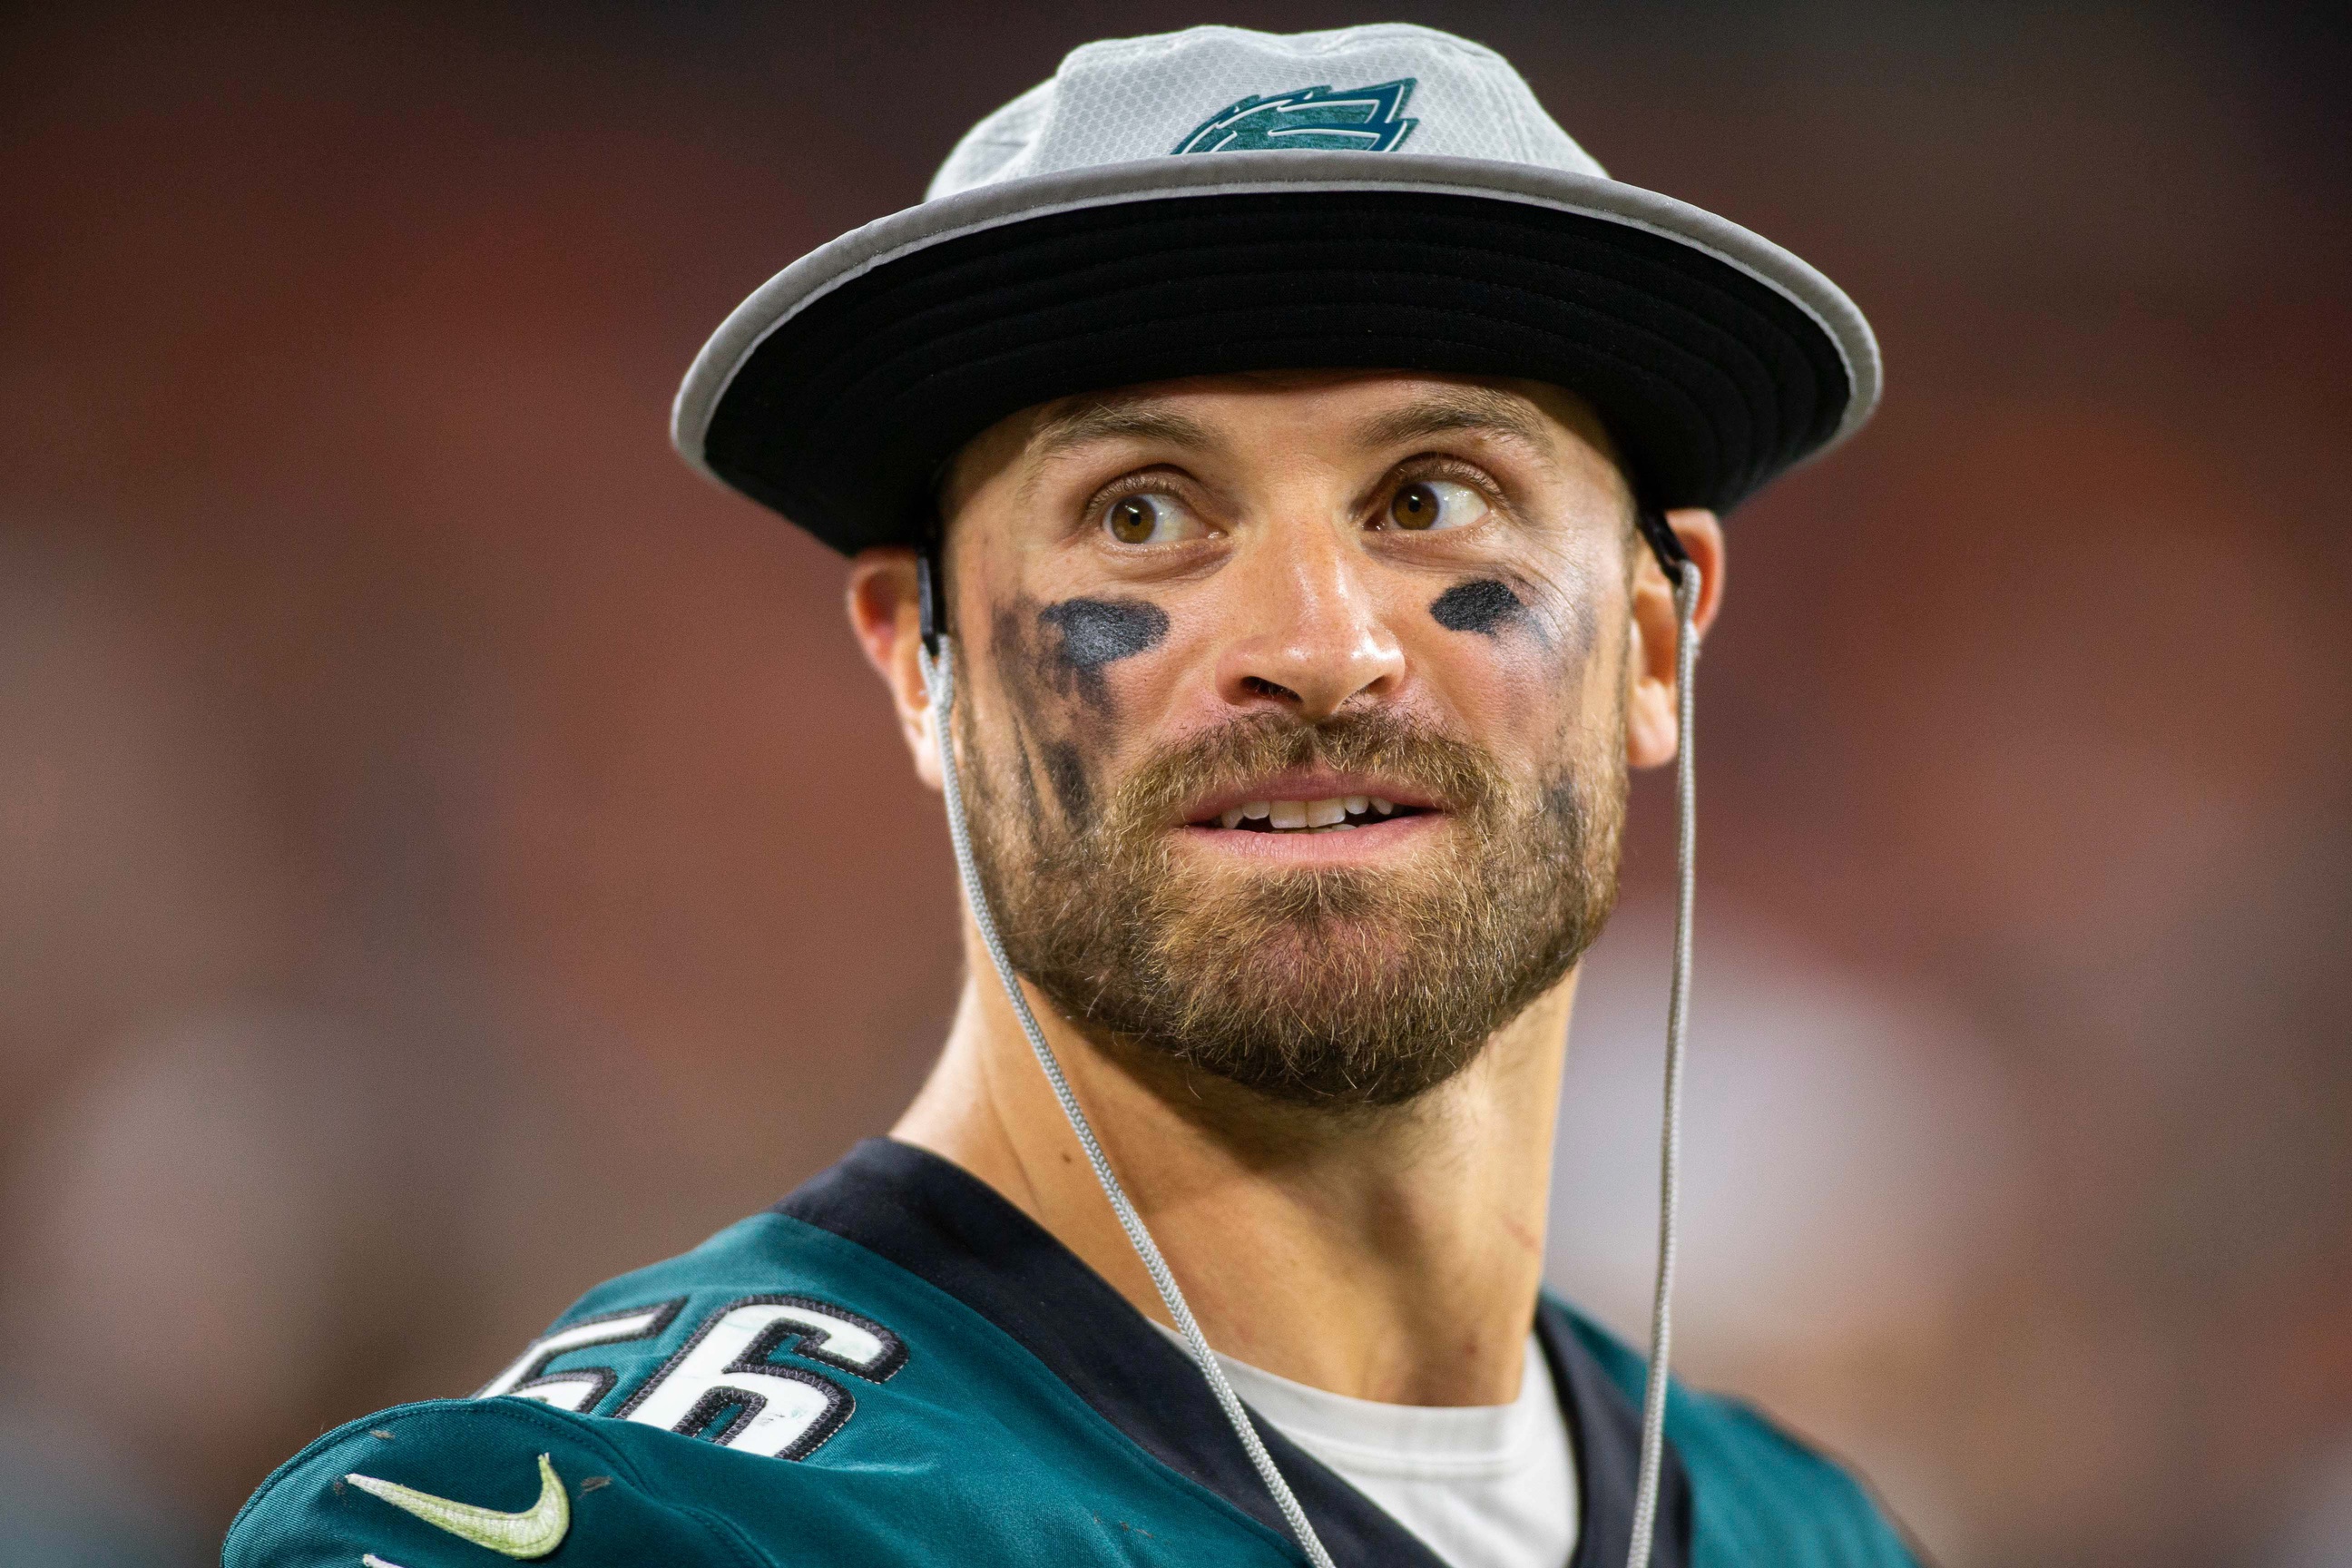 Chris Long blasts CBS for rejecting ad about legalizing marijuana2592 x 1728